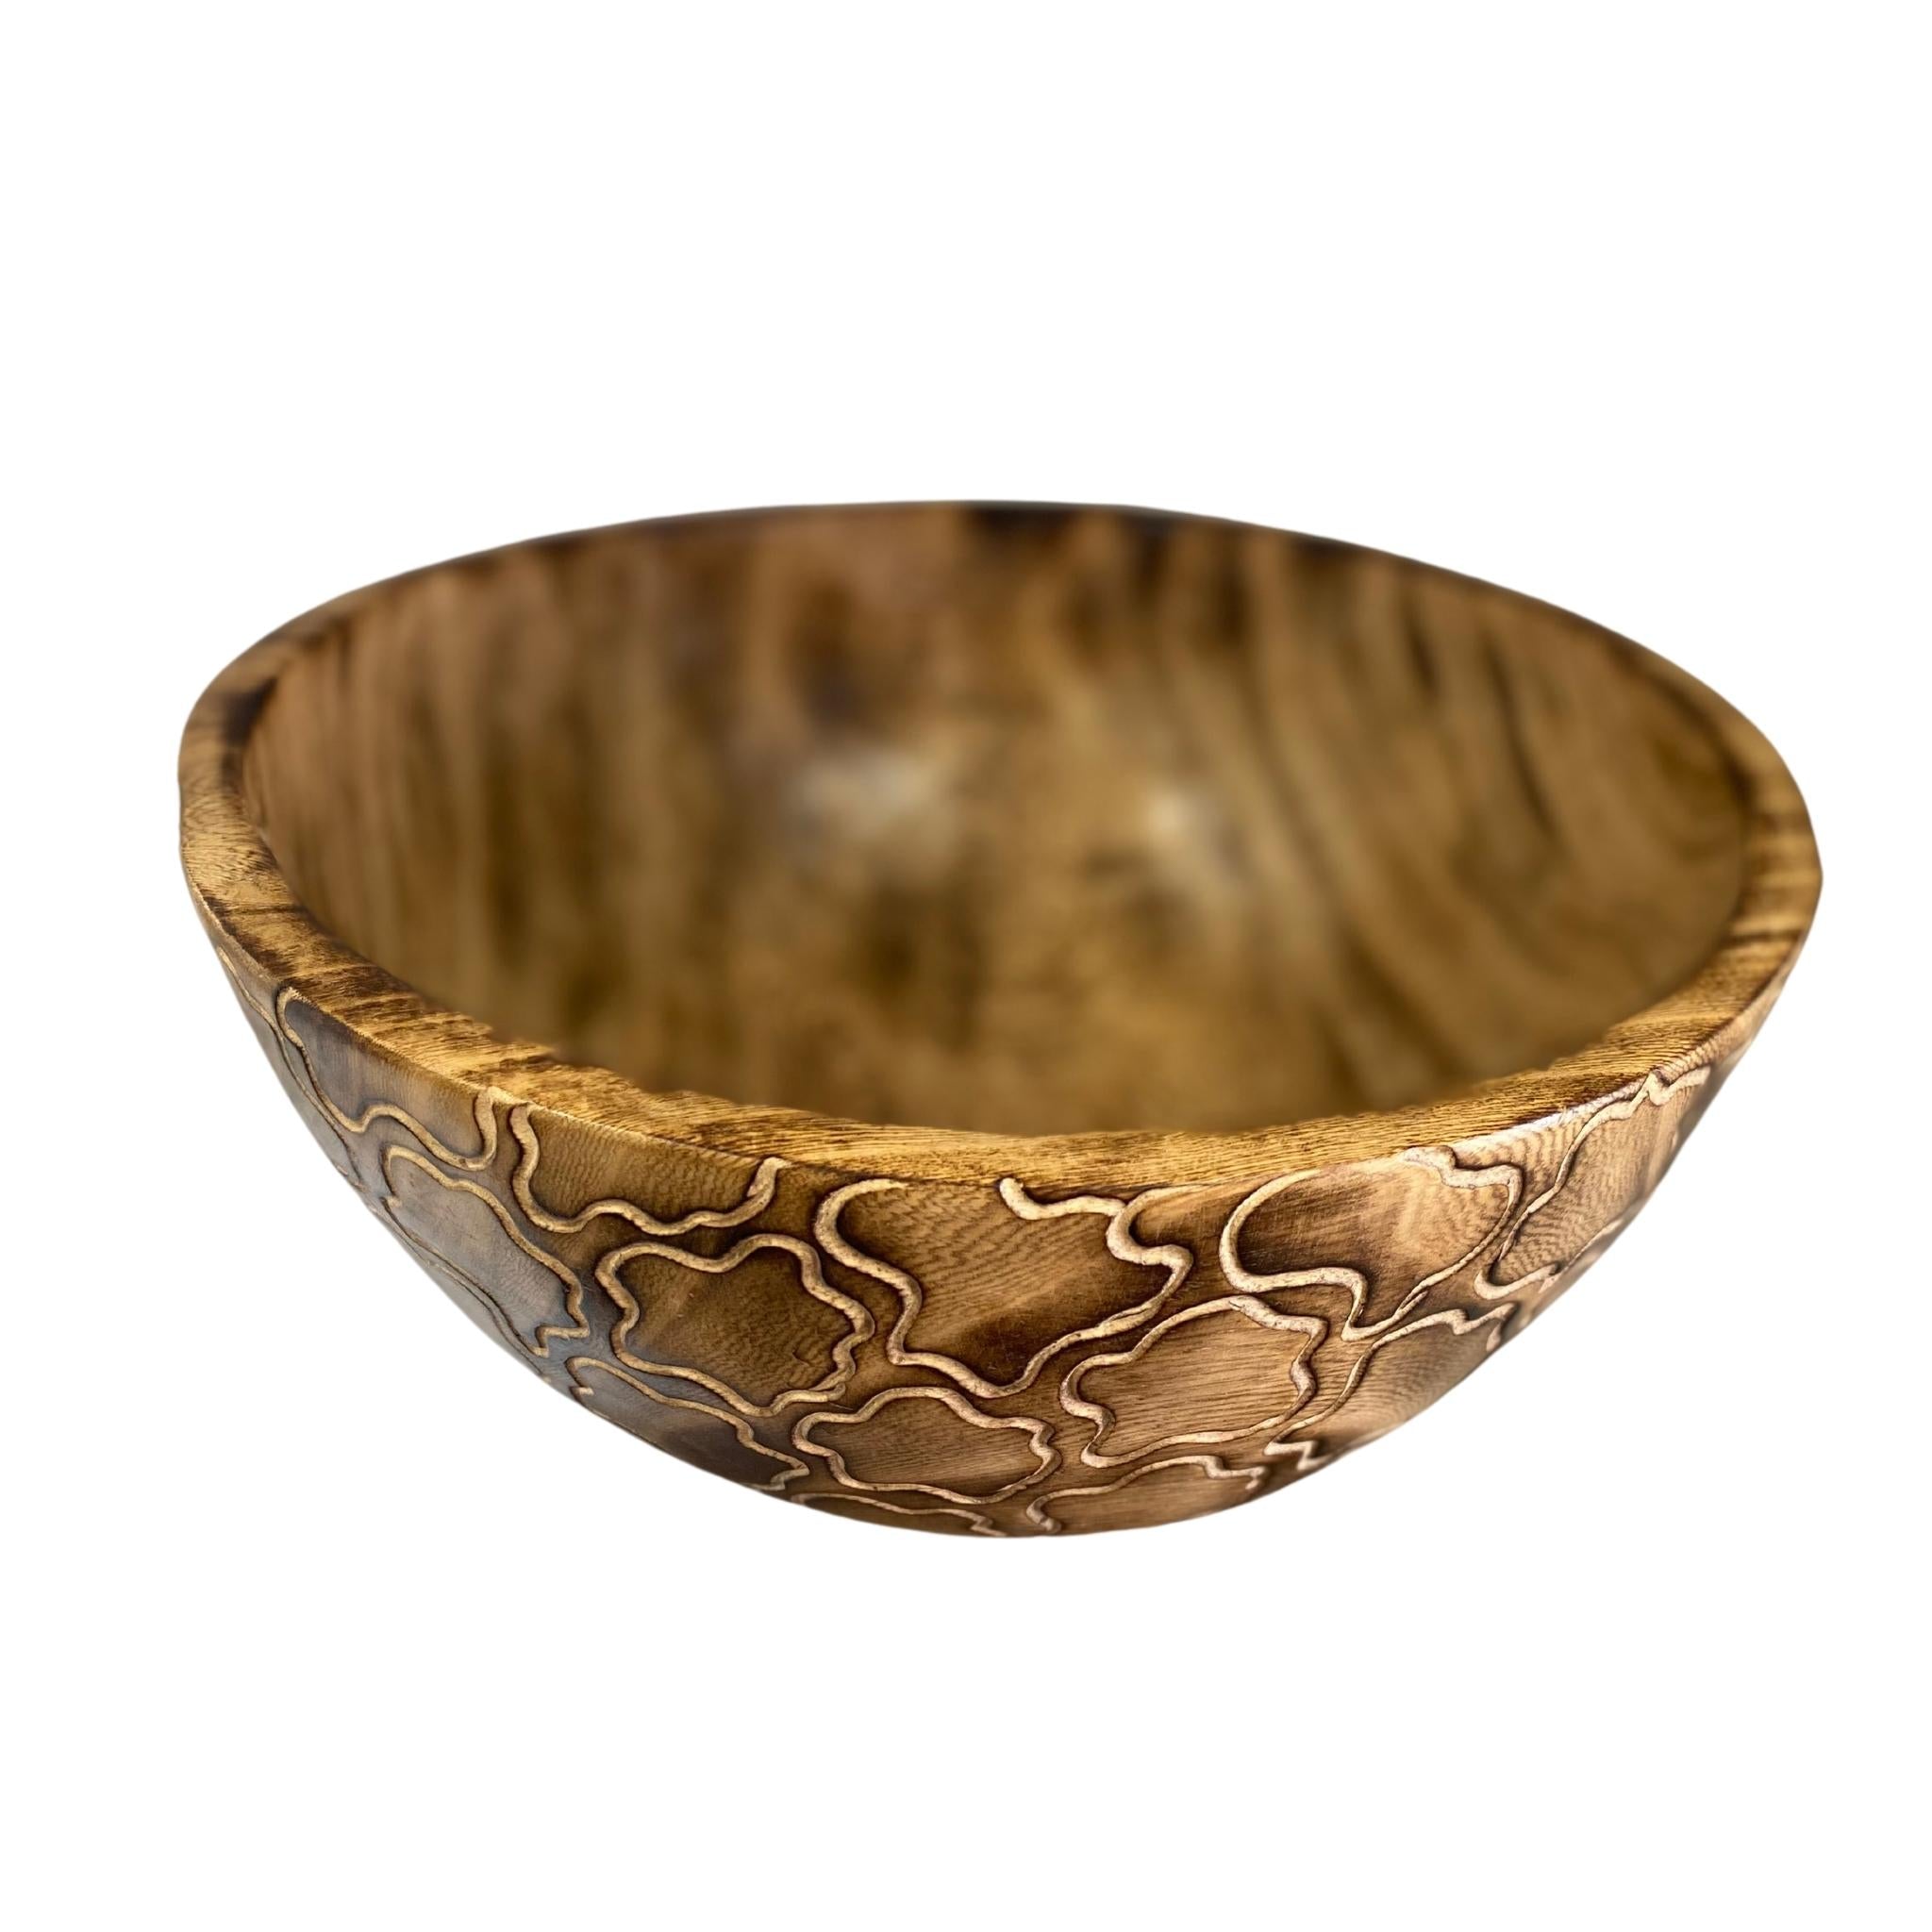 Handcrafted Wooden Salad Bowls GIRAFFE DECORATED BOWL - Tobmarc Home Decor & Gifts 